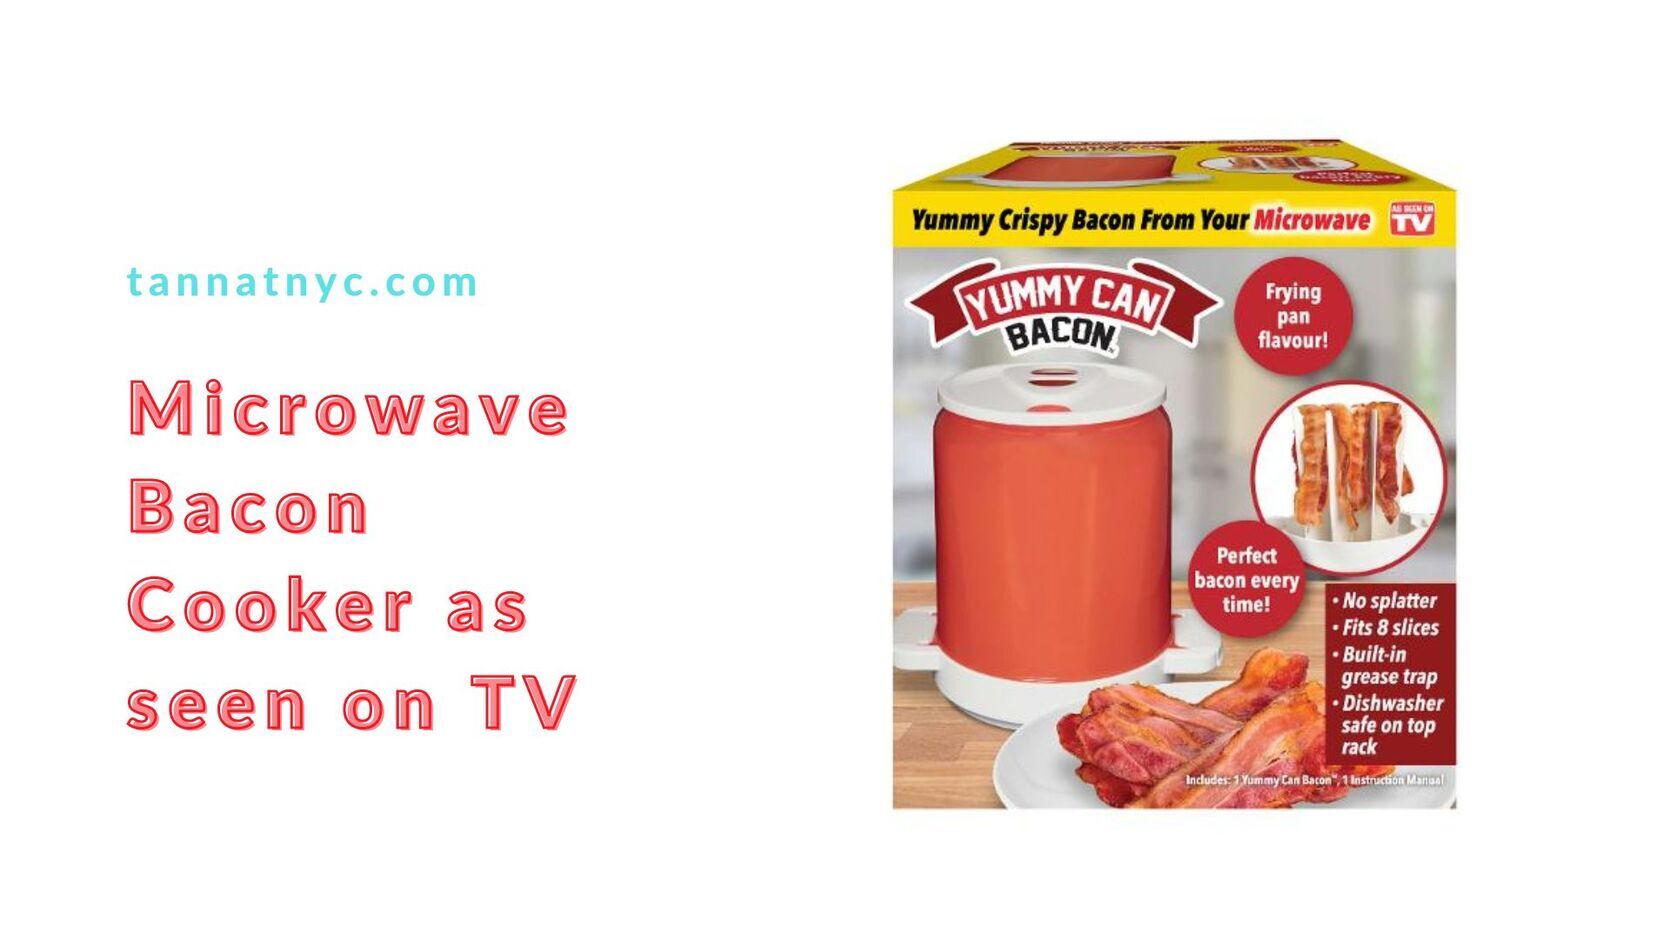 Microwave-Bacon-Cooker-as-seen-on-TV